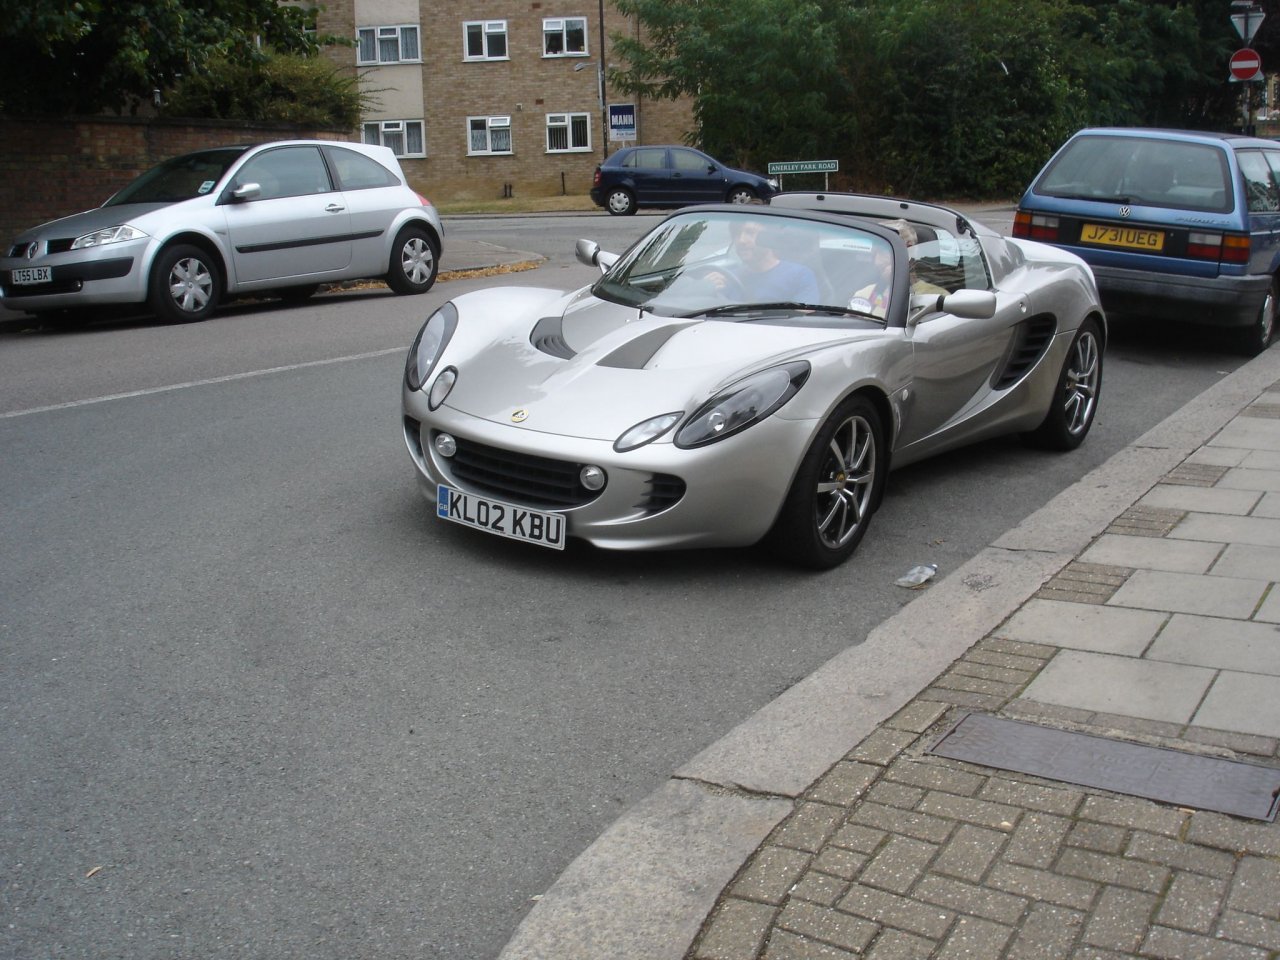 Picture of Lotus Elise S2 111S